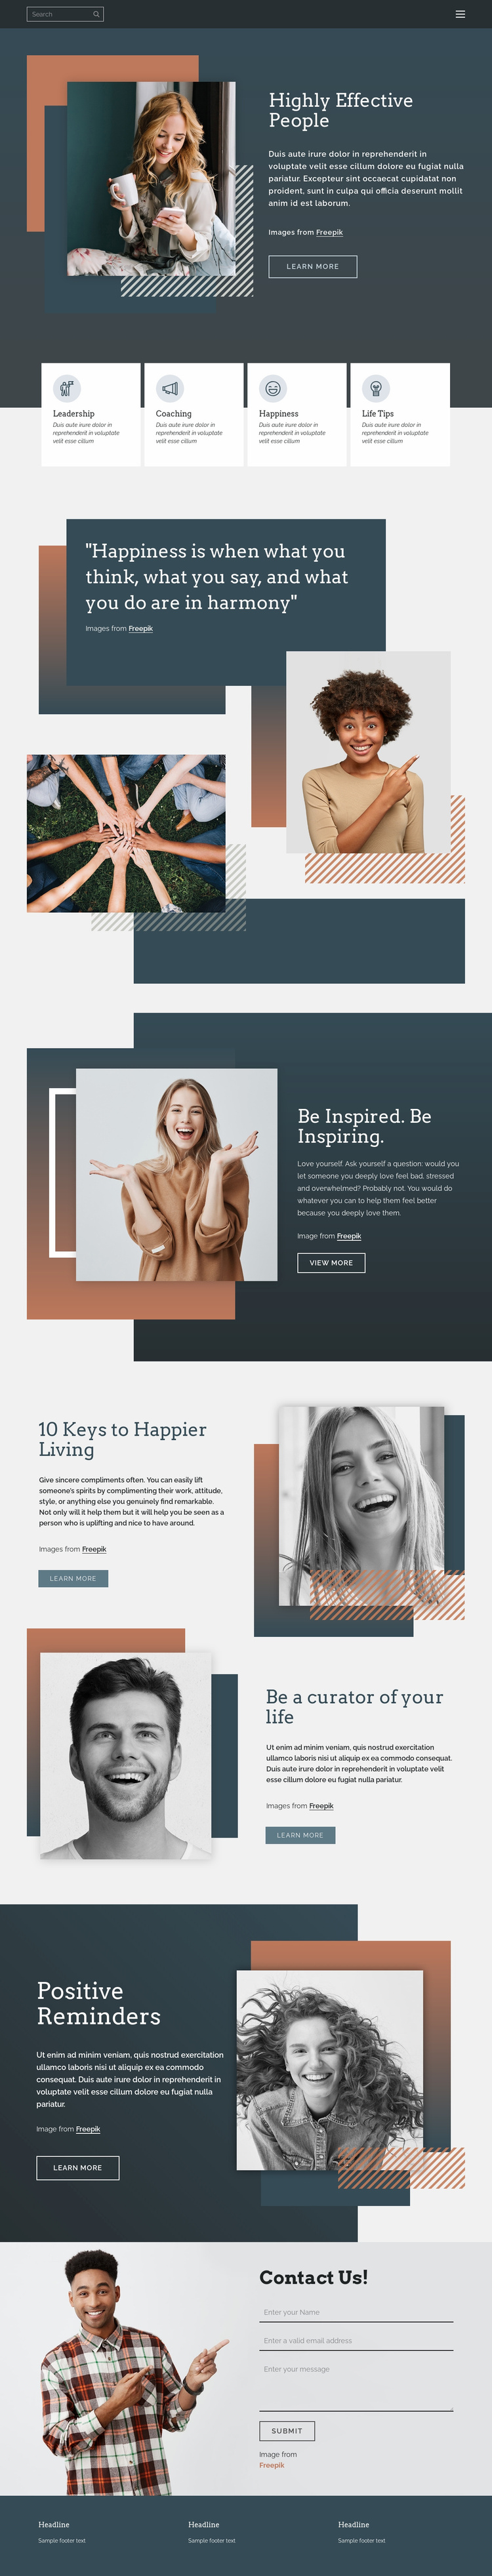 How to be successful in life Landing Page